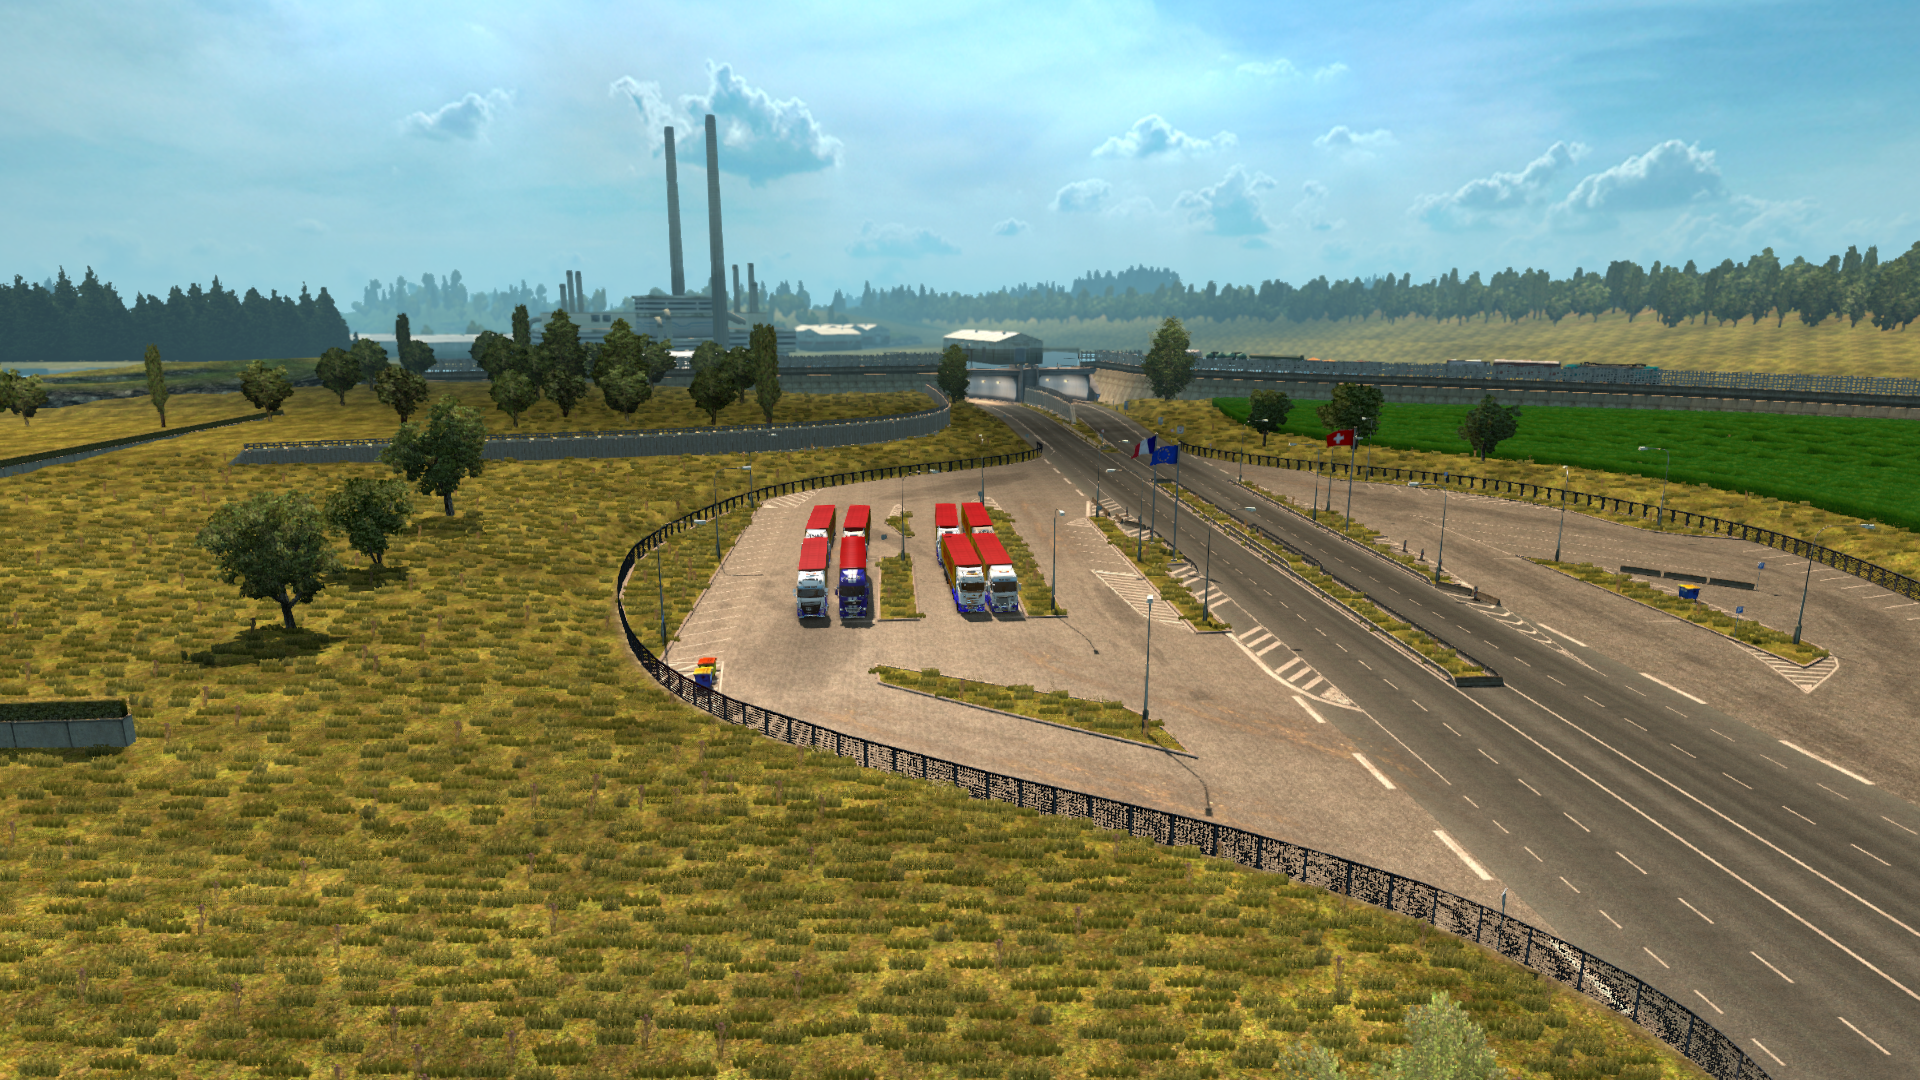 ets2_20180606_000725_00.png